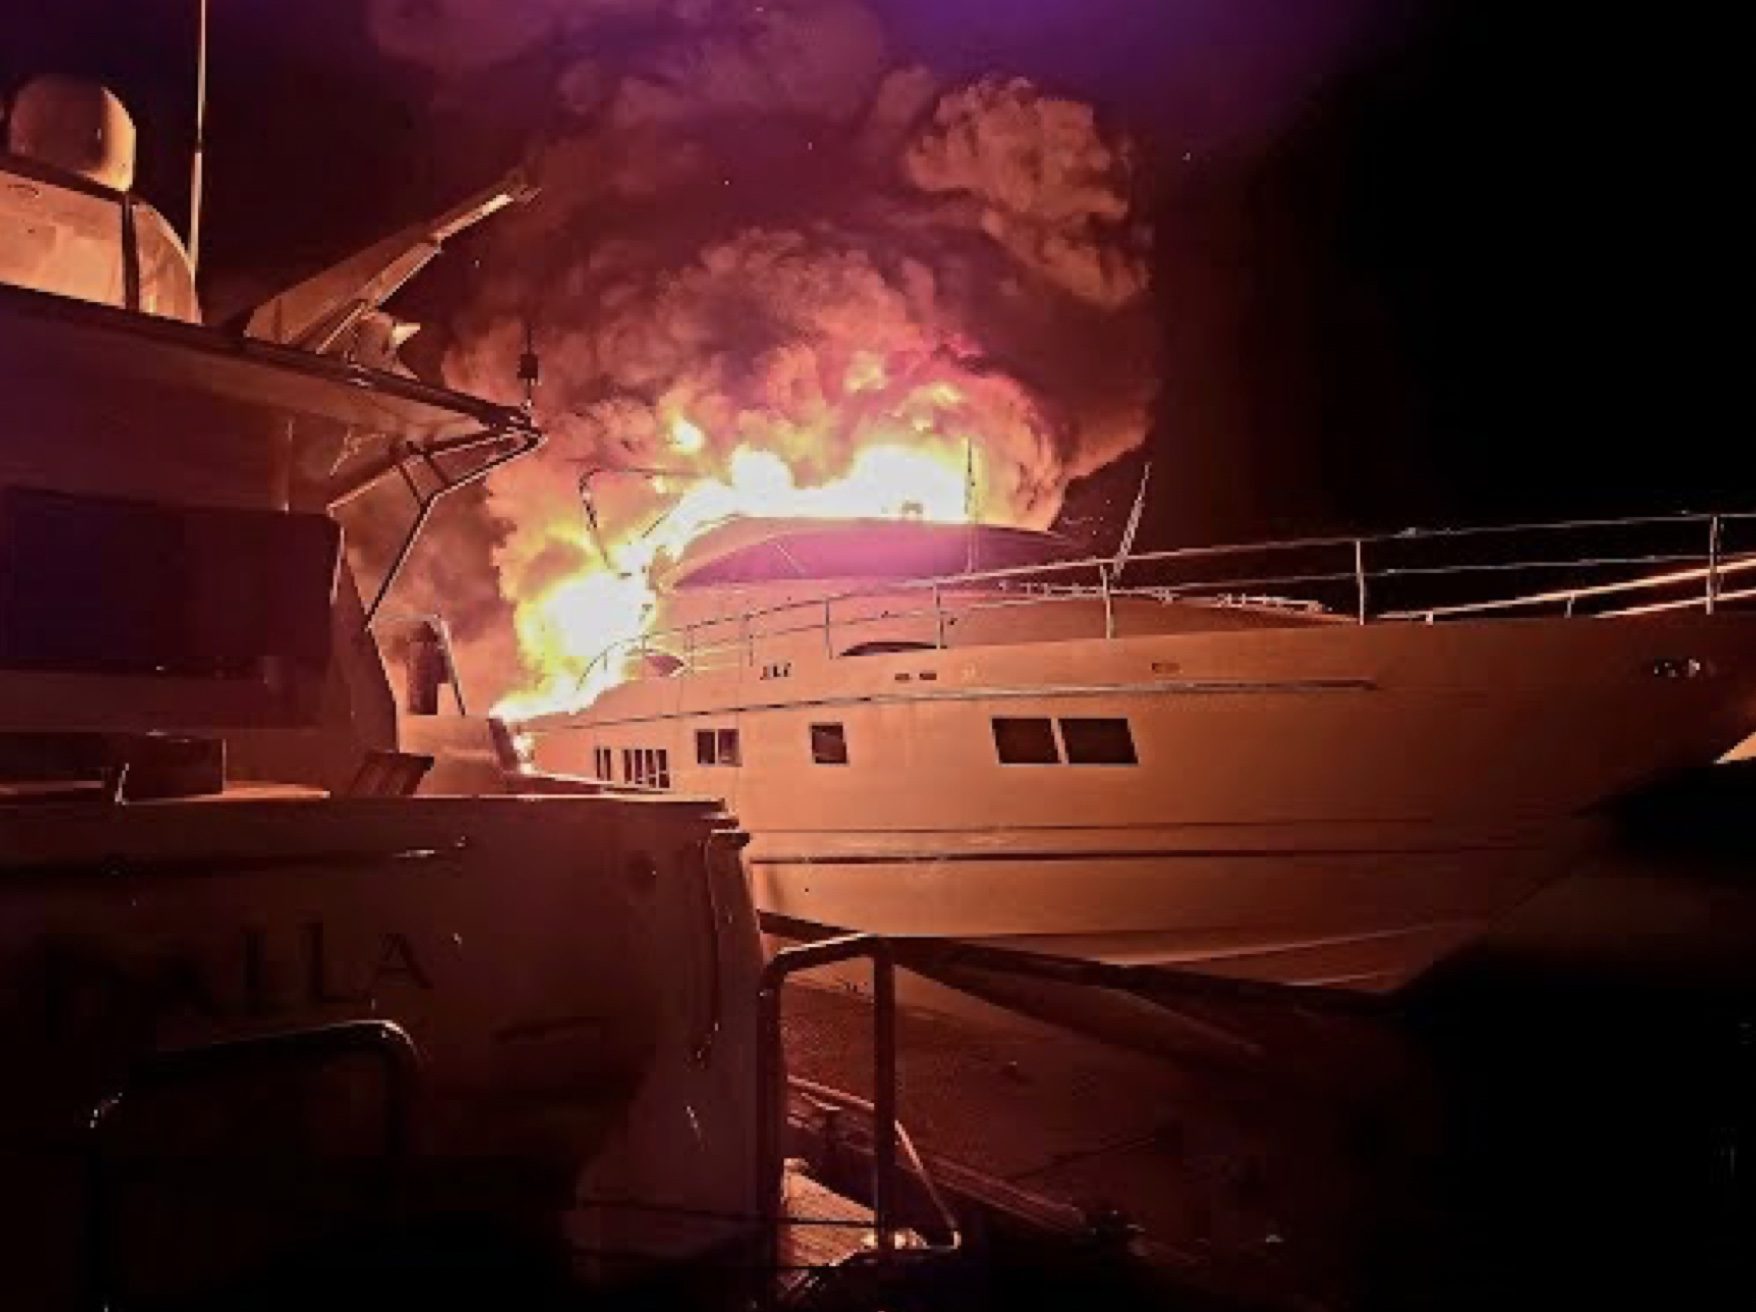 Combustion of Oily Rags Causes $1.5 Million Yacht Fire